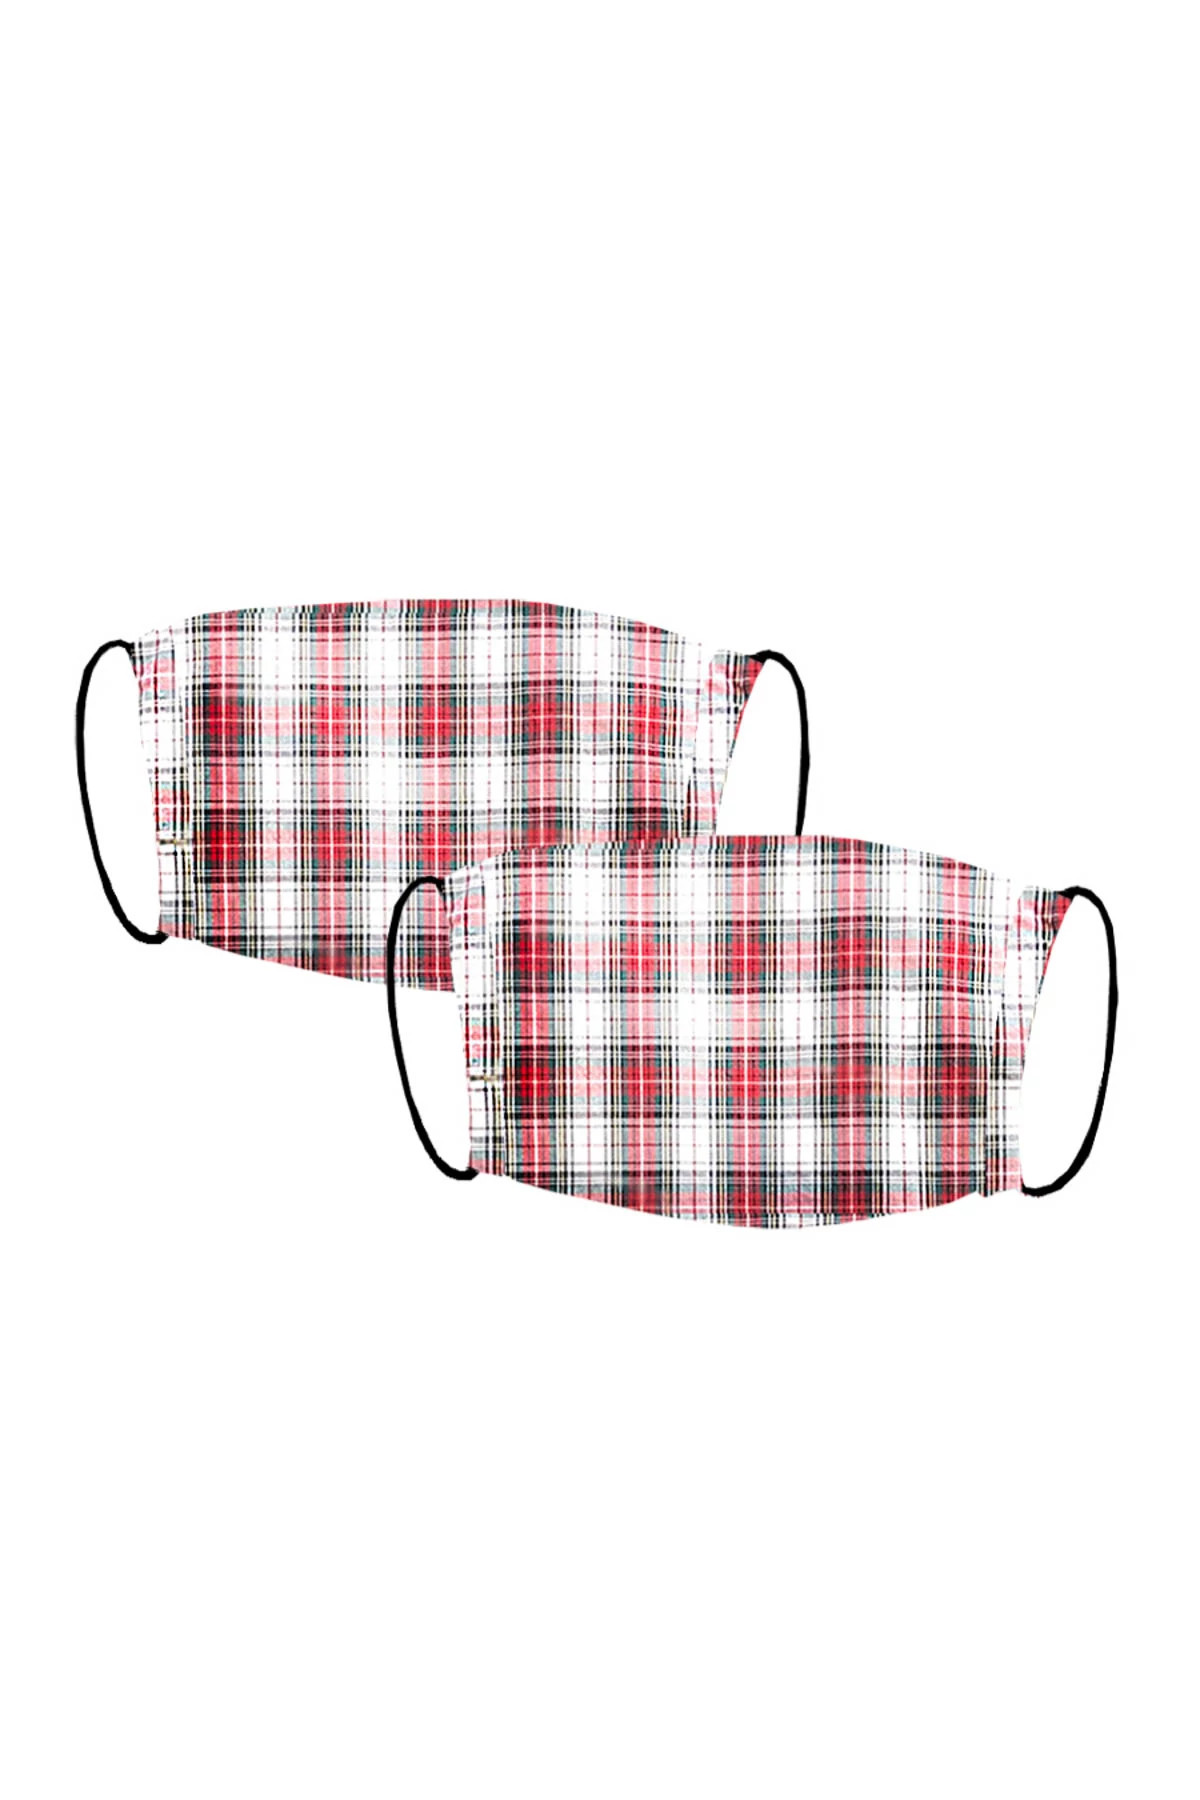 WHITE GINGHAM Gingham Cotton Kids Peace Mask (2 Pack) image number 1